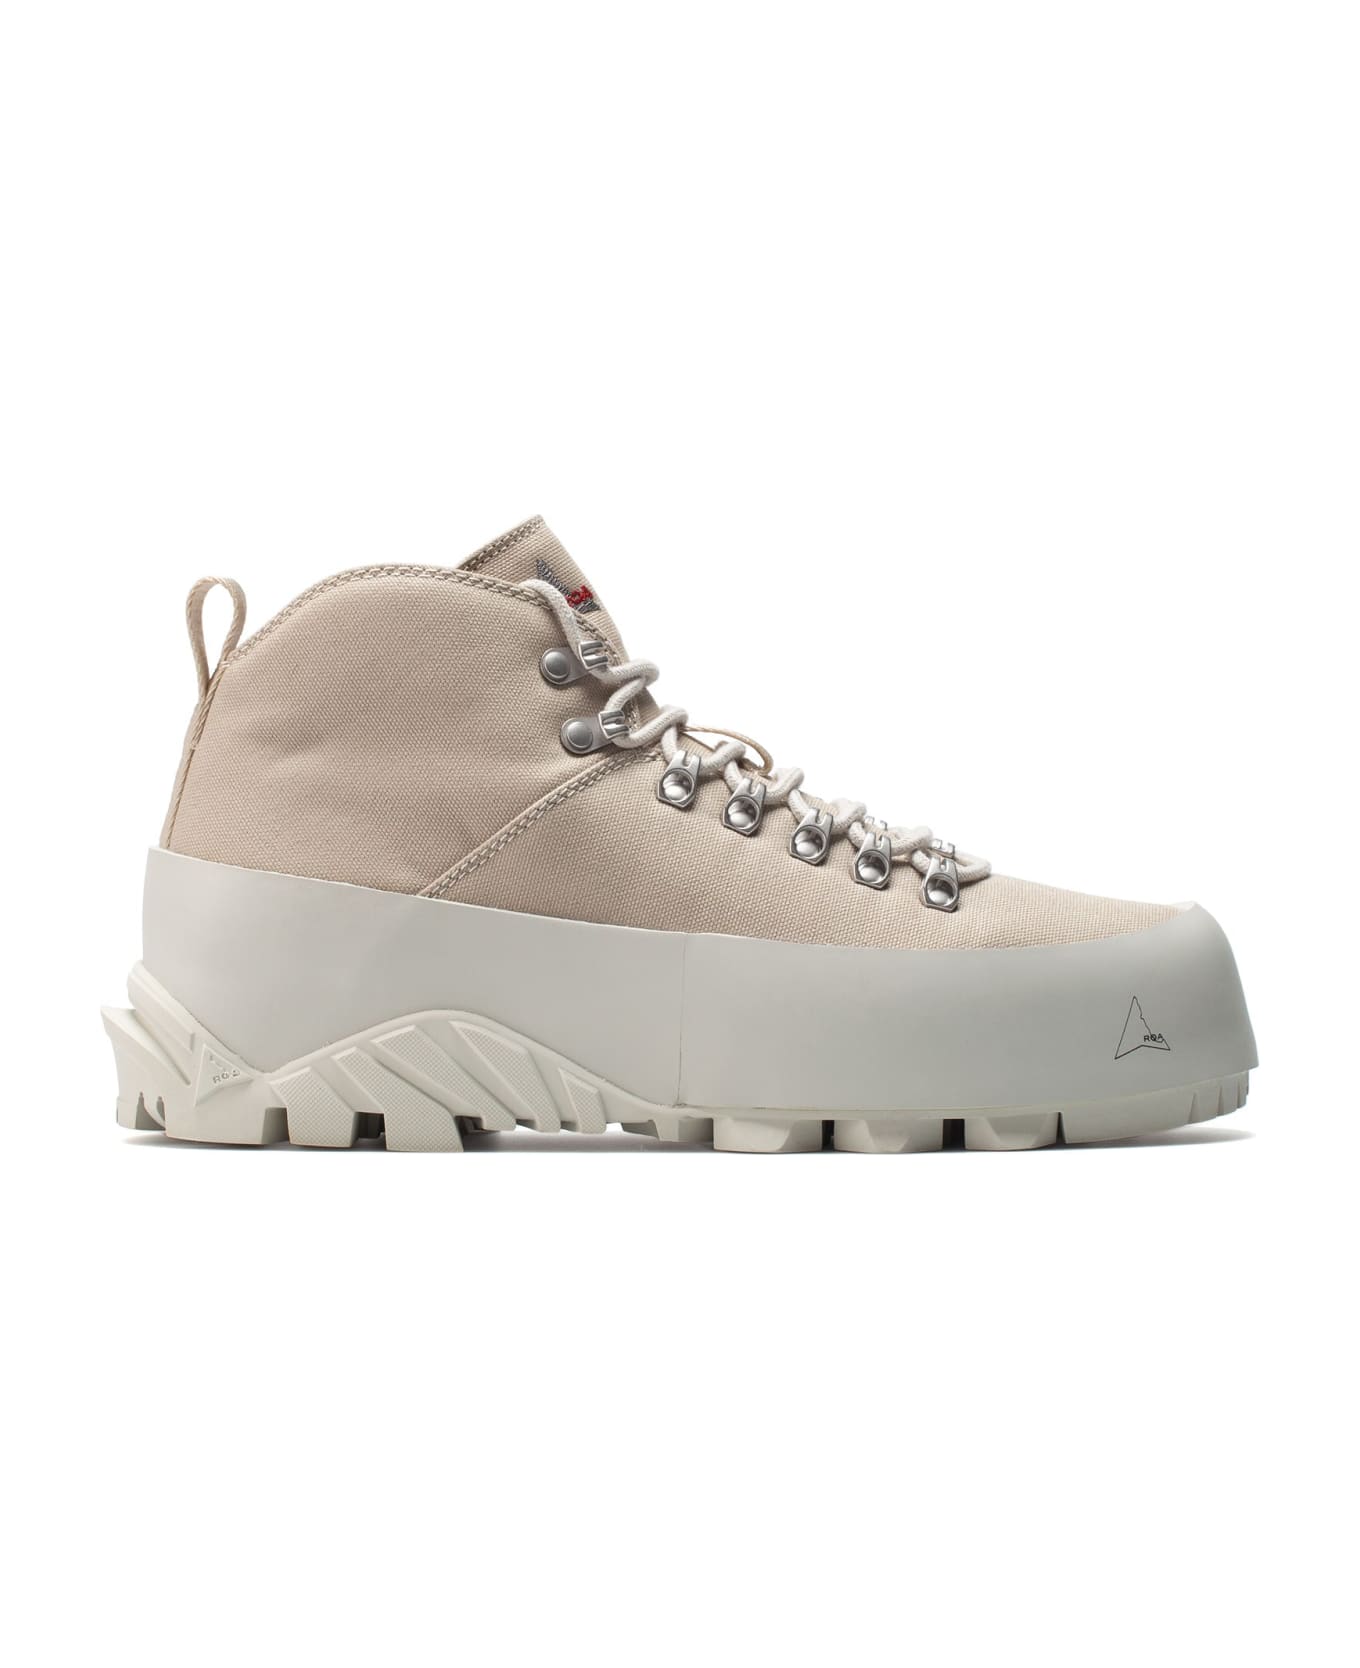 ROA Cvo Boots (taupe) - Beige